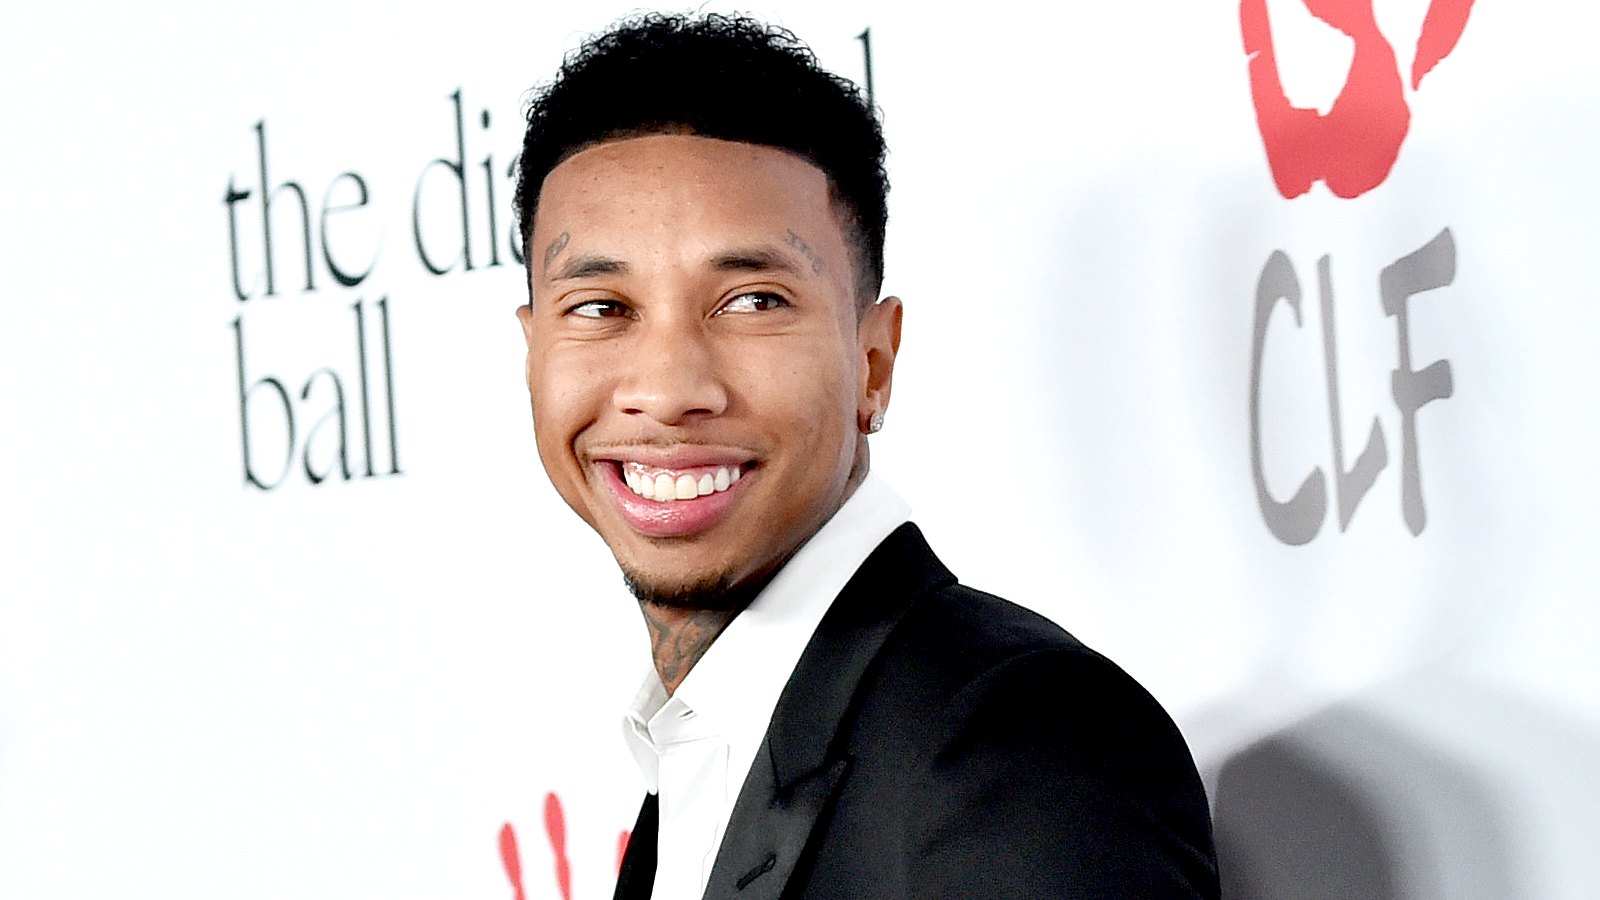 Tyga attends the 2nd Annual Diamond Ball on December 10, 2015.